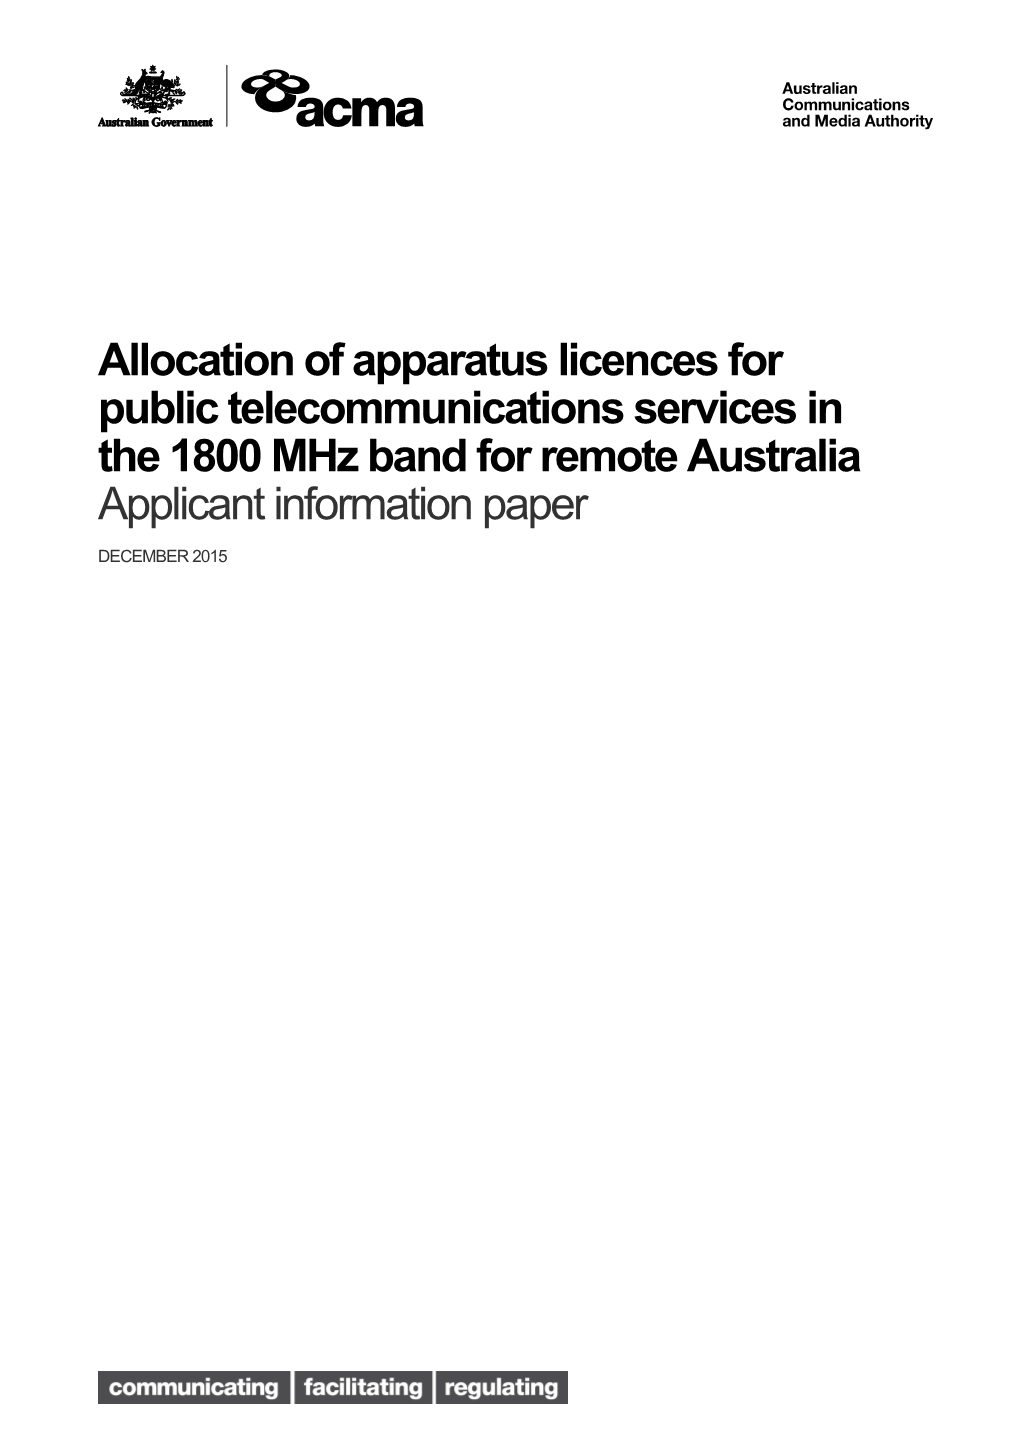 Allocation of Apparatus Licences for Public Telecommunications Services in the 1800 Mhz